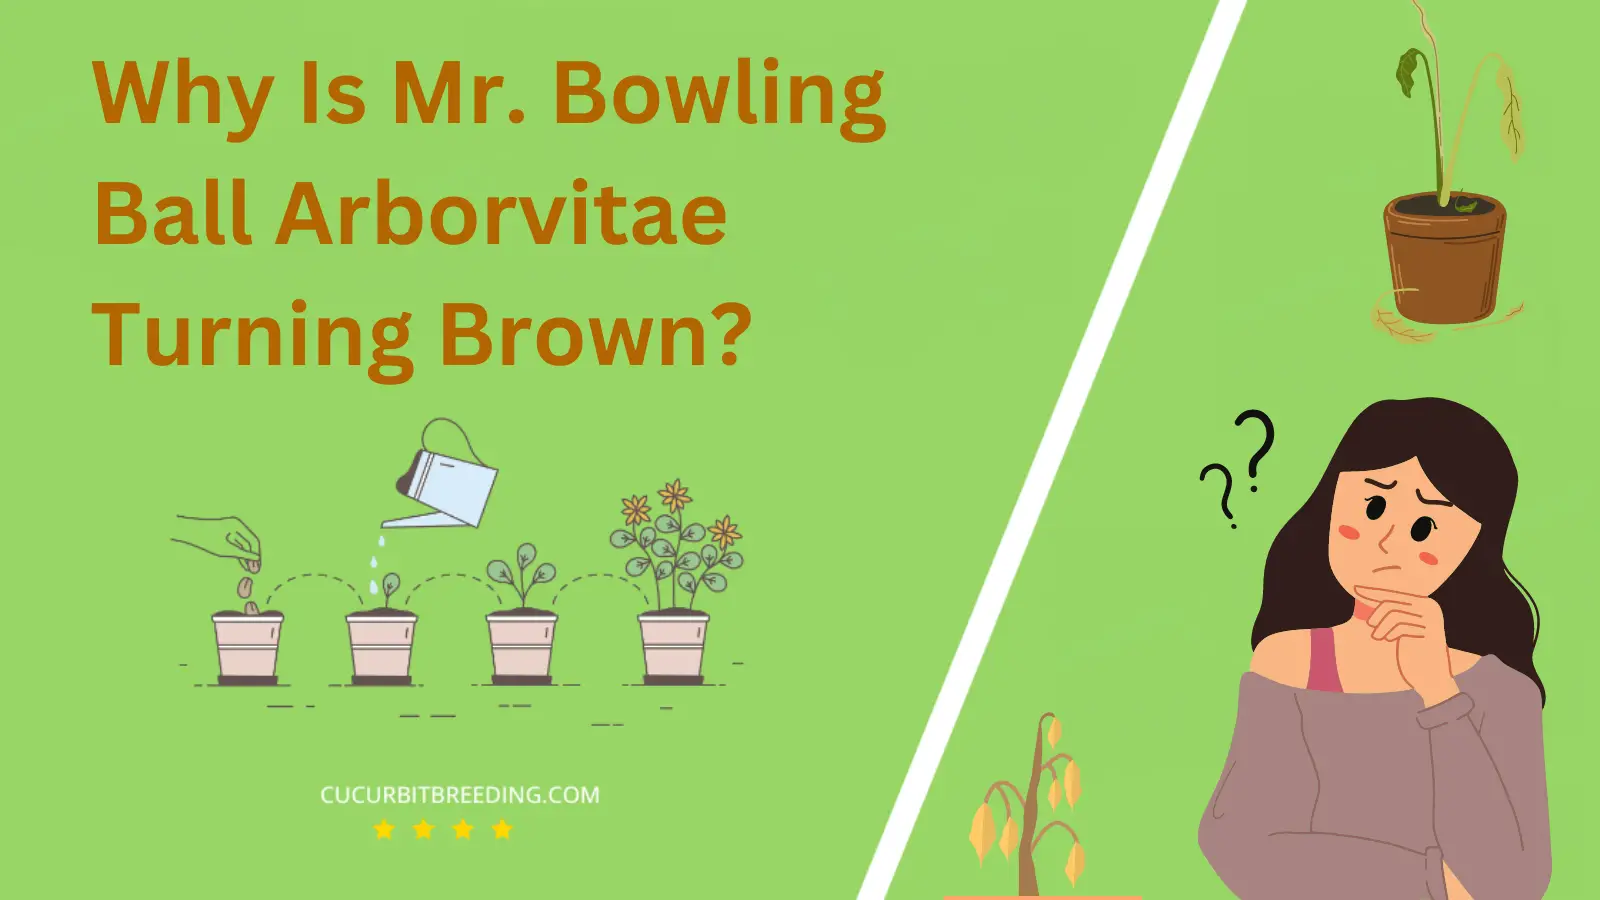 Why Is Mr. Bowling Ball Arborvitae Turning Brown